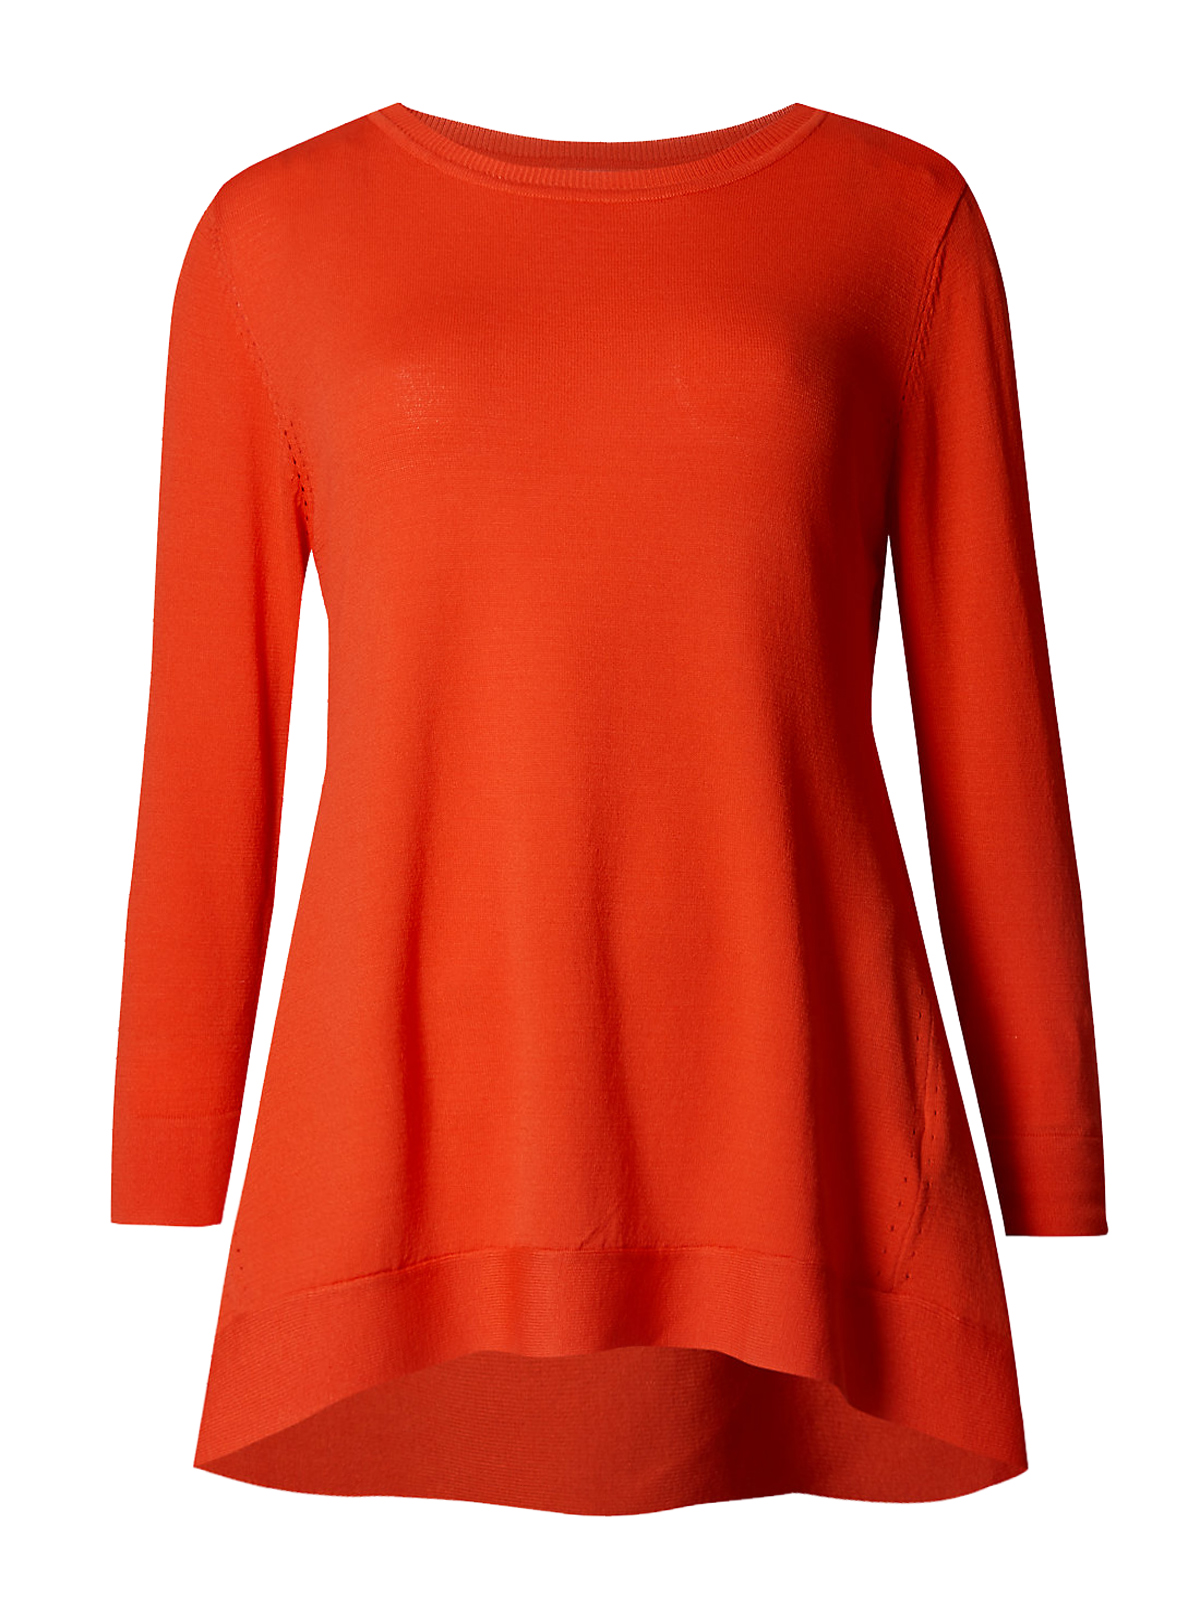 Marks and Spencer - - P3rUna PAPRIKA Dipped Side Round Neck Jumper ...